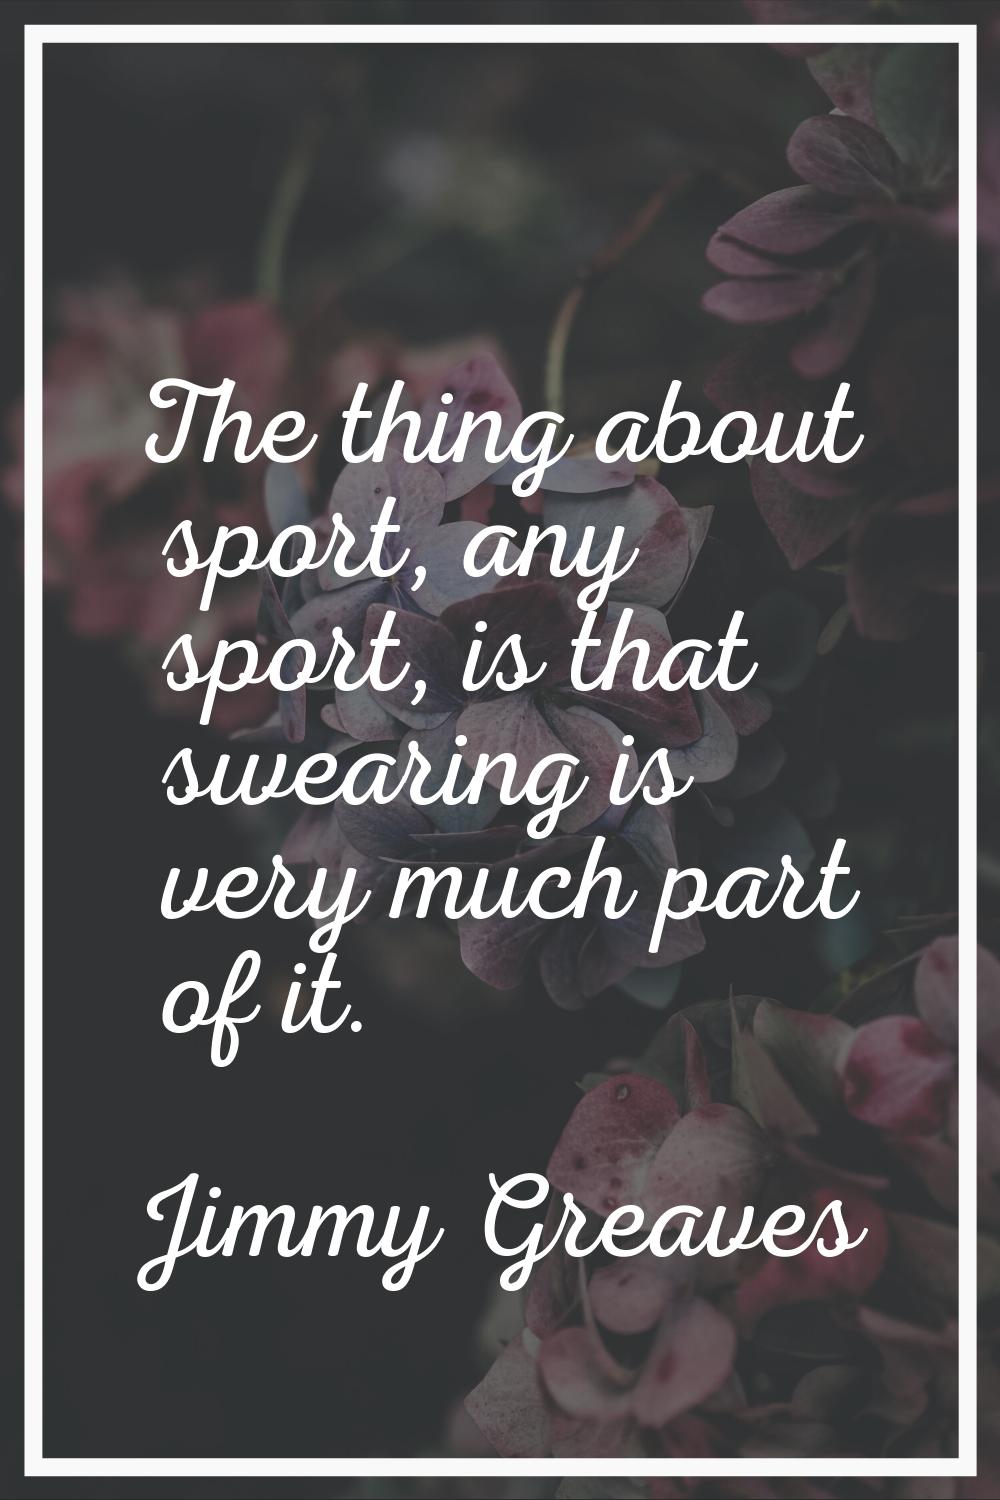 The thing about sport, any sport, is that swearing is very much part of it.